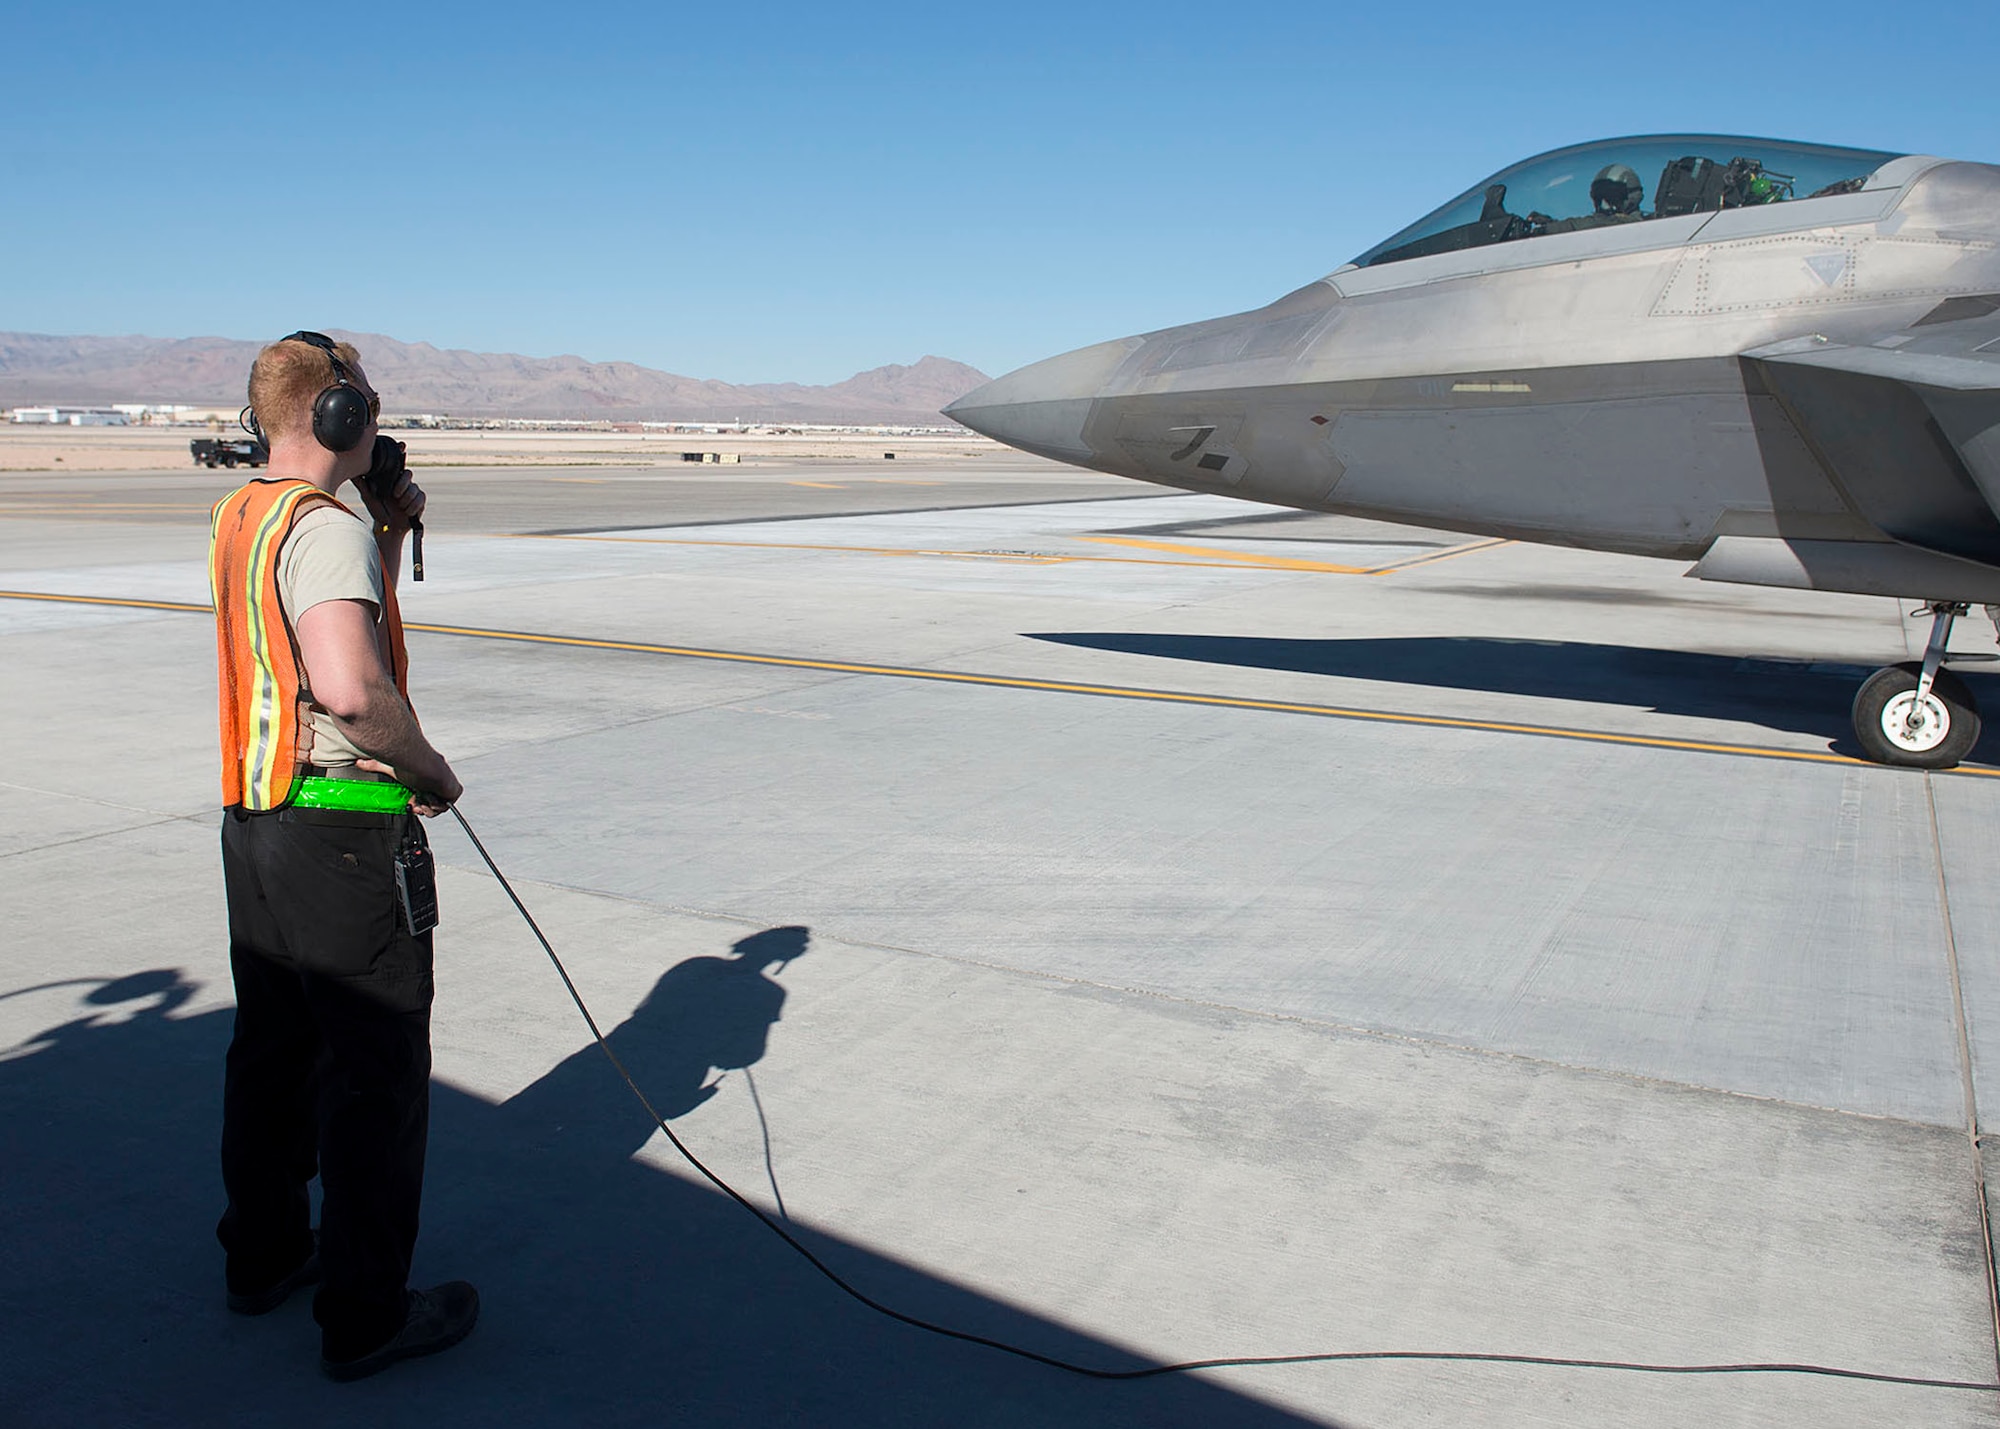 Staff Sgt. Guy Hinton, 57th Aircraft Maintenance Squadron Raptor Aircraft Maintenance Unit Dedicated Crew Chief, directs a F-22 Raptor fighter jet at Nellis Air Force Base, Nevada, Nov. 7, 2018. The 57th AMXS accomplishes on-equipment maintenance to include aircraft servicing, before and after flight inspections, launch and recovery, munitions loading and accomplishment of schedule/unscheduled maintenance requirements.(U.S. Air Force photo by Airman 1st Class Bryan T. Guthrie)